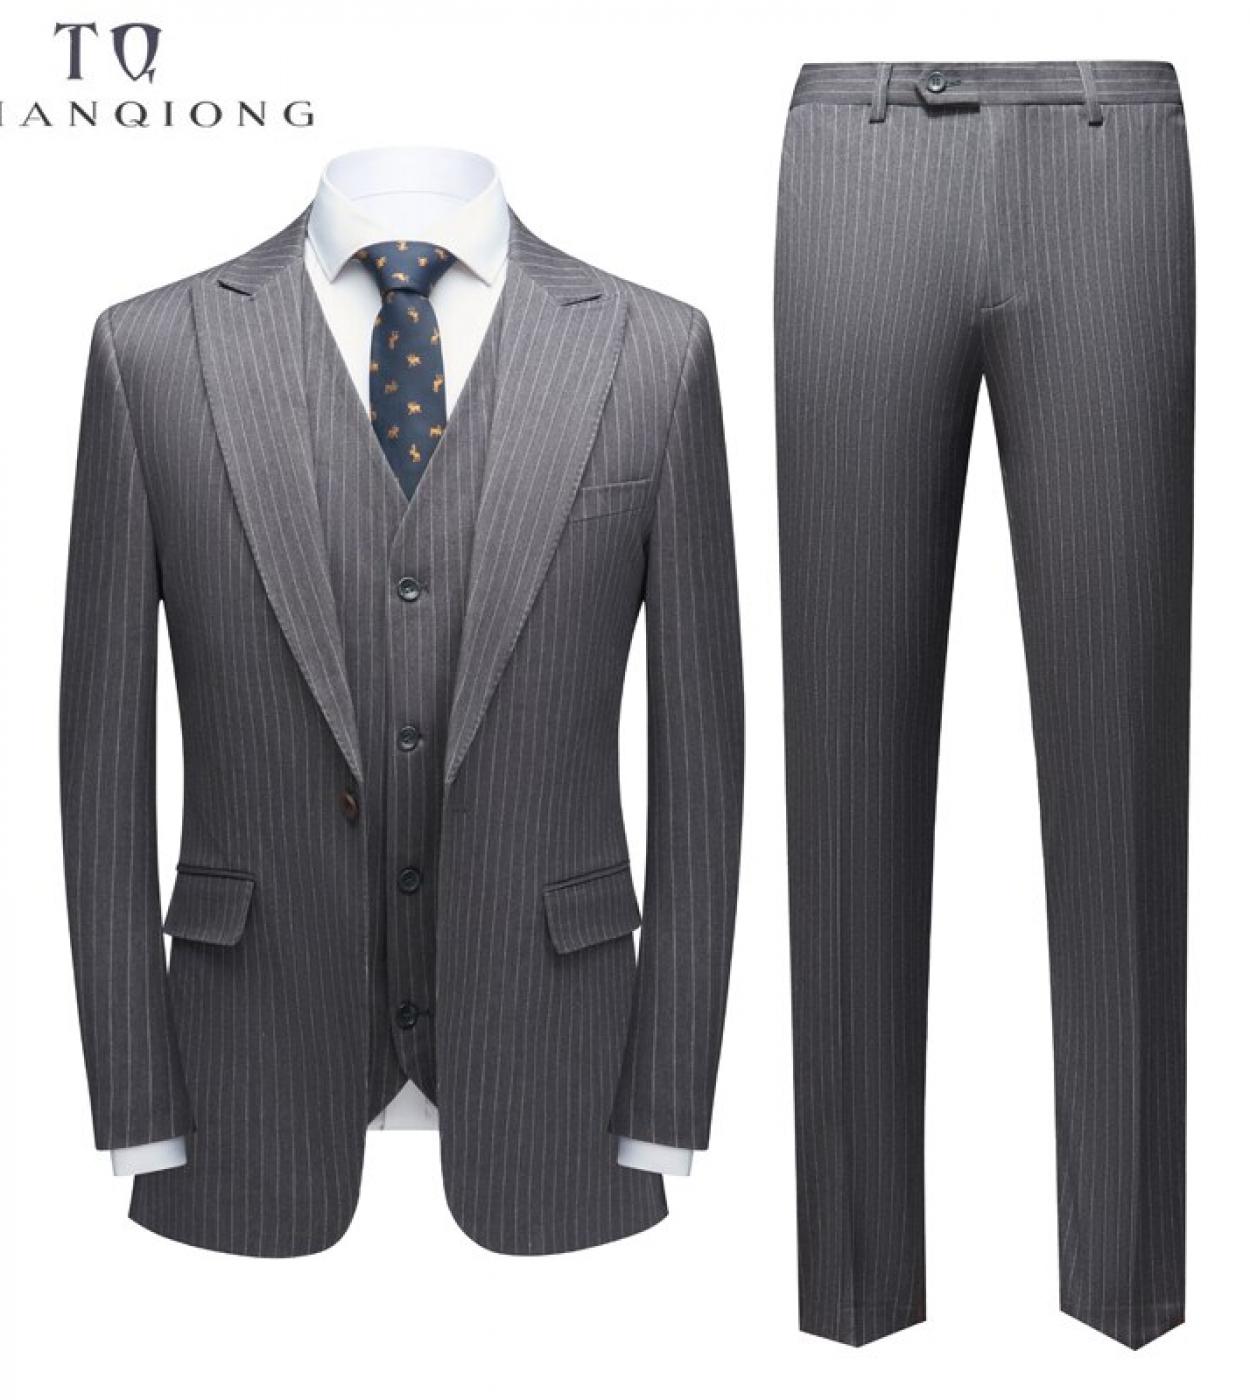 Tian Qiong 2022 New Mens Casual Suit Mens Wedding Dress Striped Suit Three Pieces Set Large Size Mens Formal Suit S 6